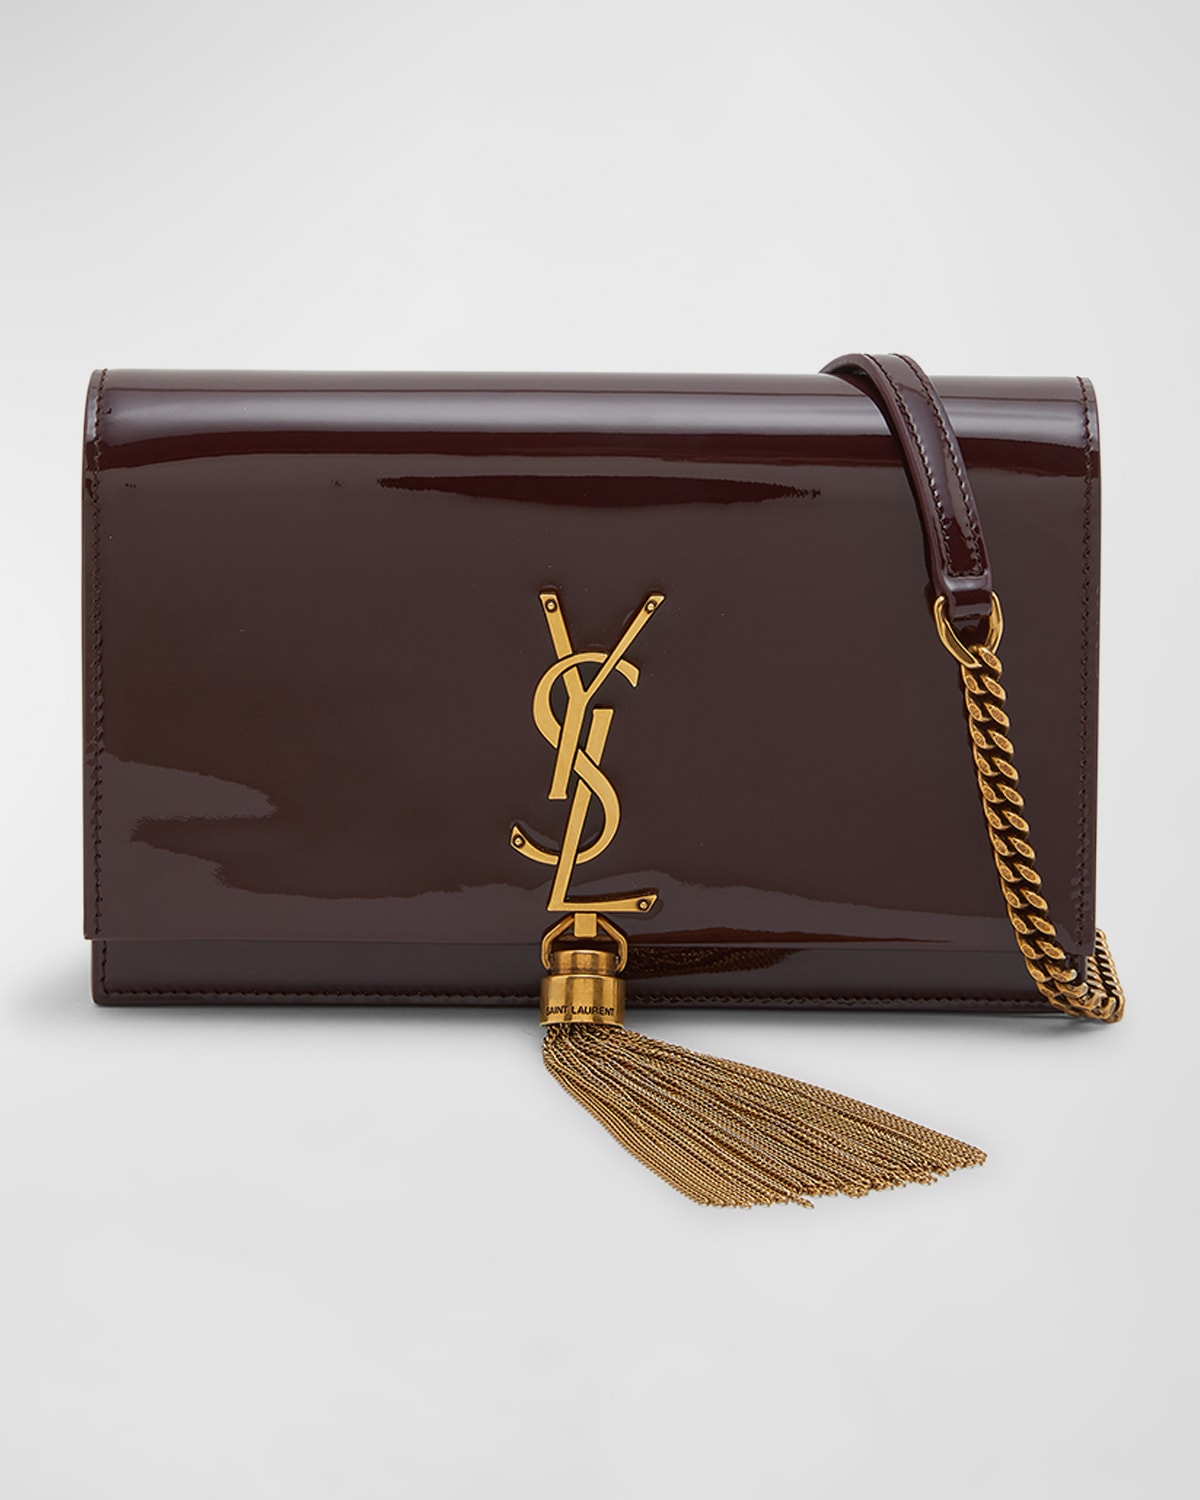 SAINT LAURENT KATE SMALL TASSEL YSL WALLET ON CHAIN IN PATENT LEATHER